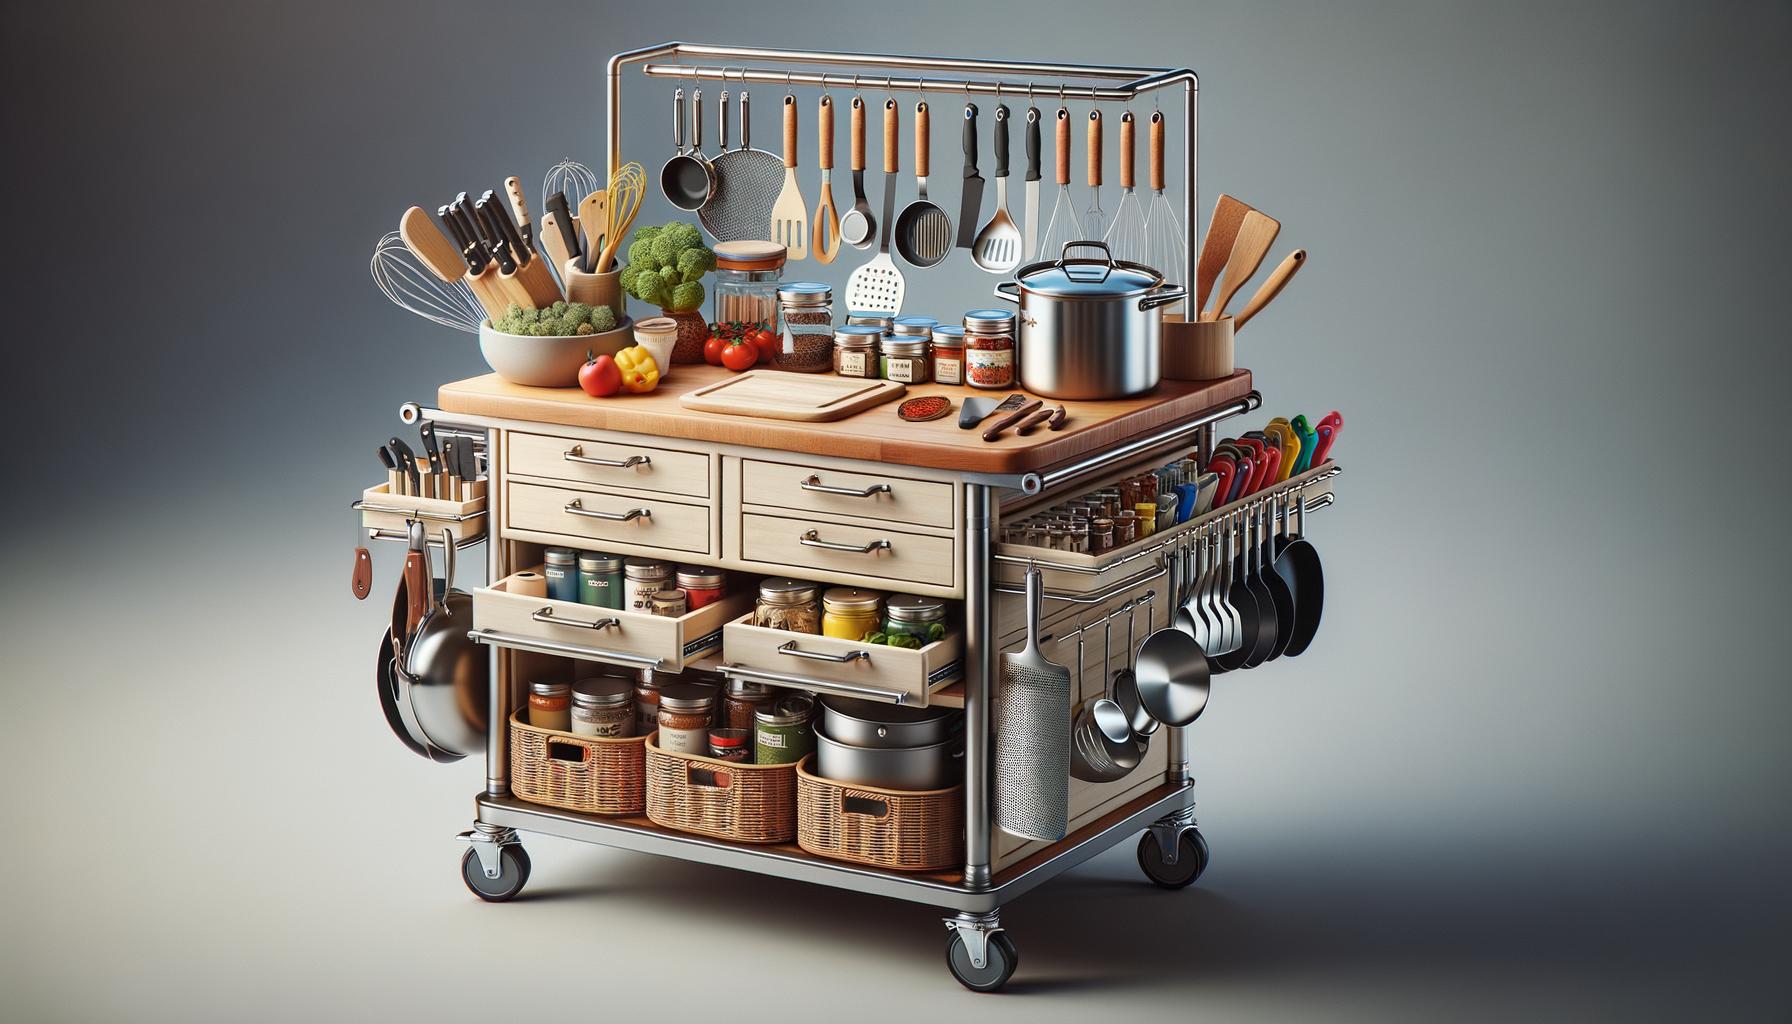 prompt: a stylish portable kitchen island filled with cooking supplies